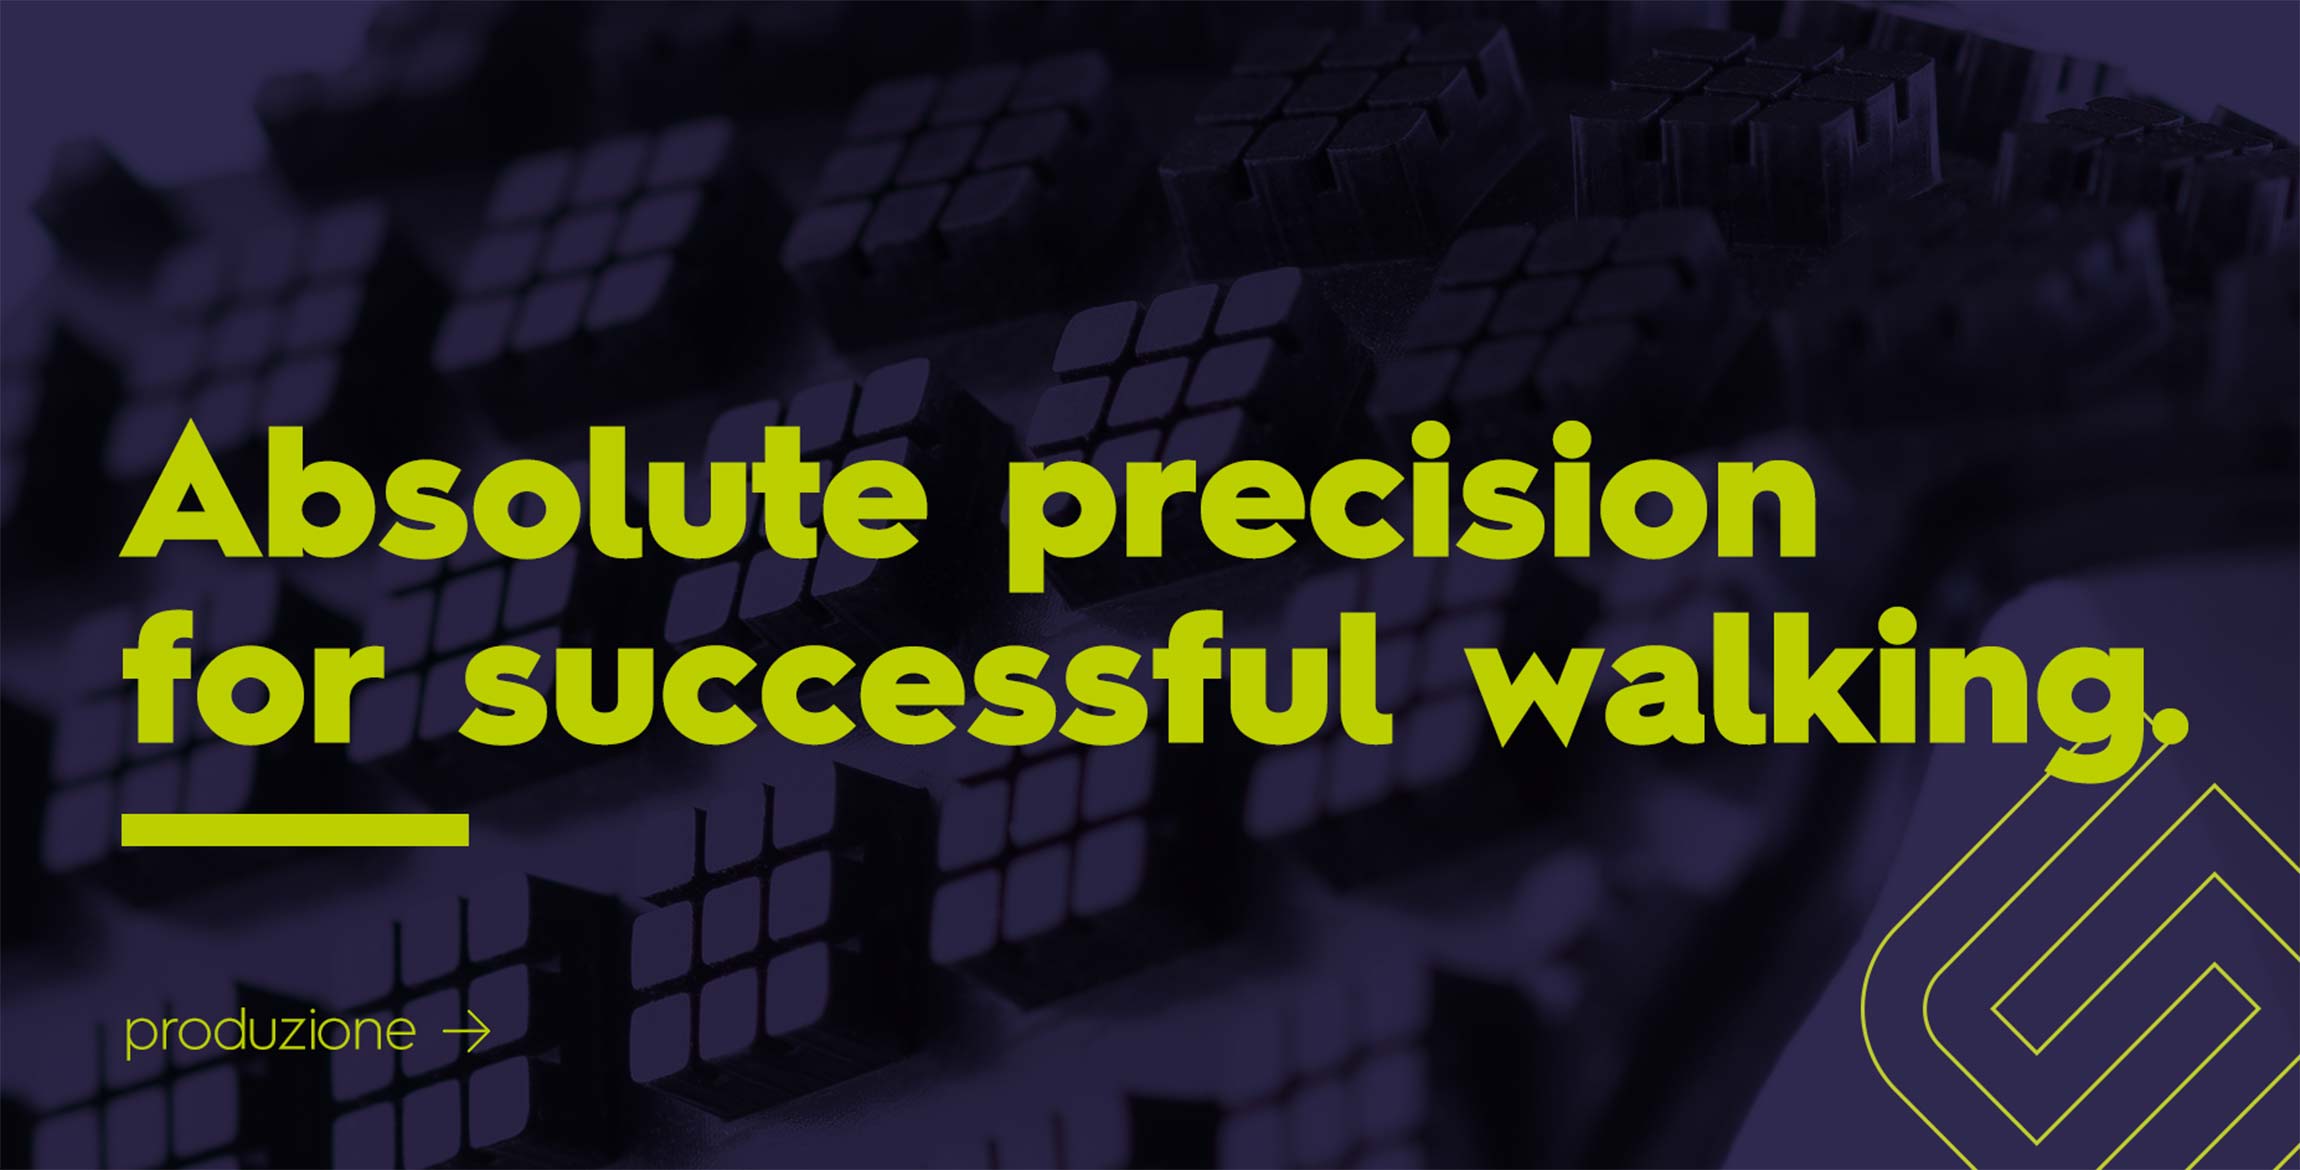 Absolute precision for successful walking